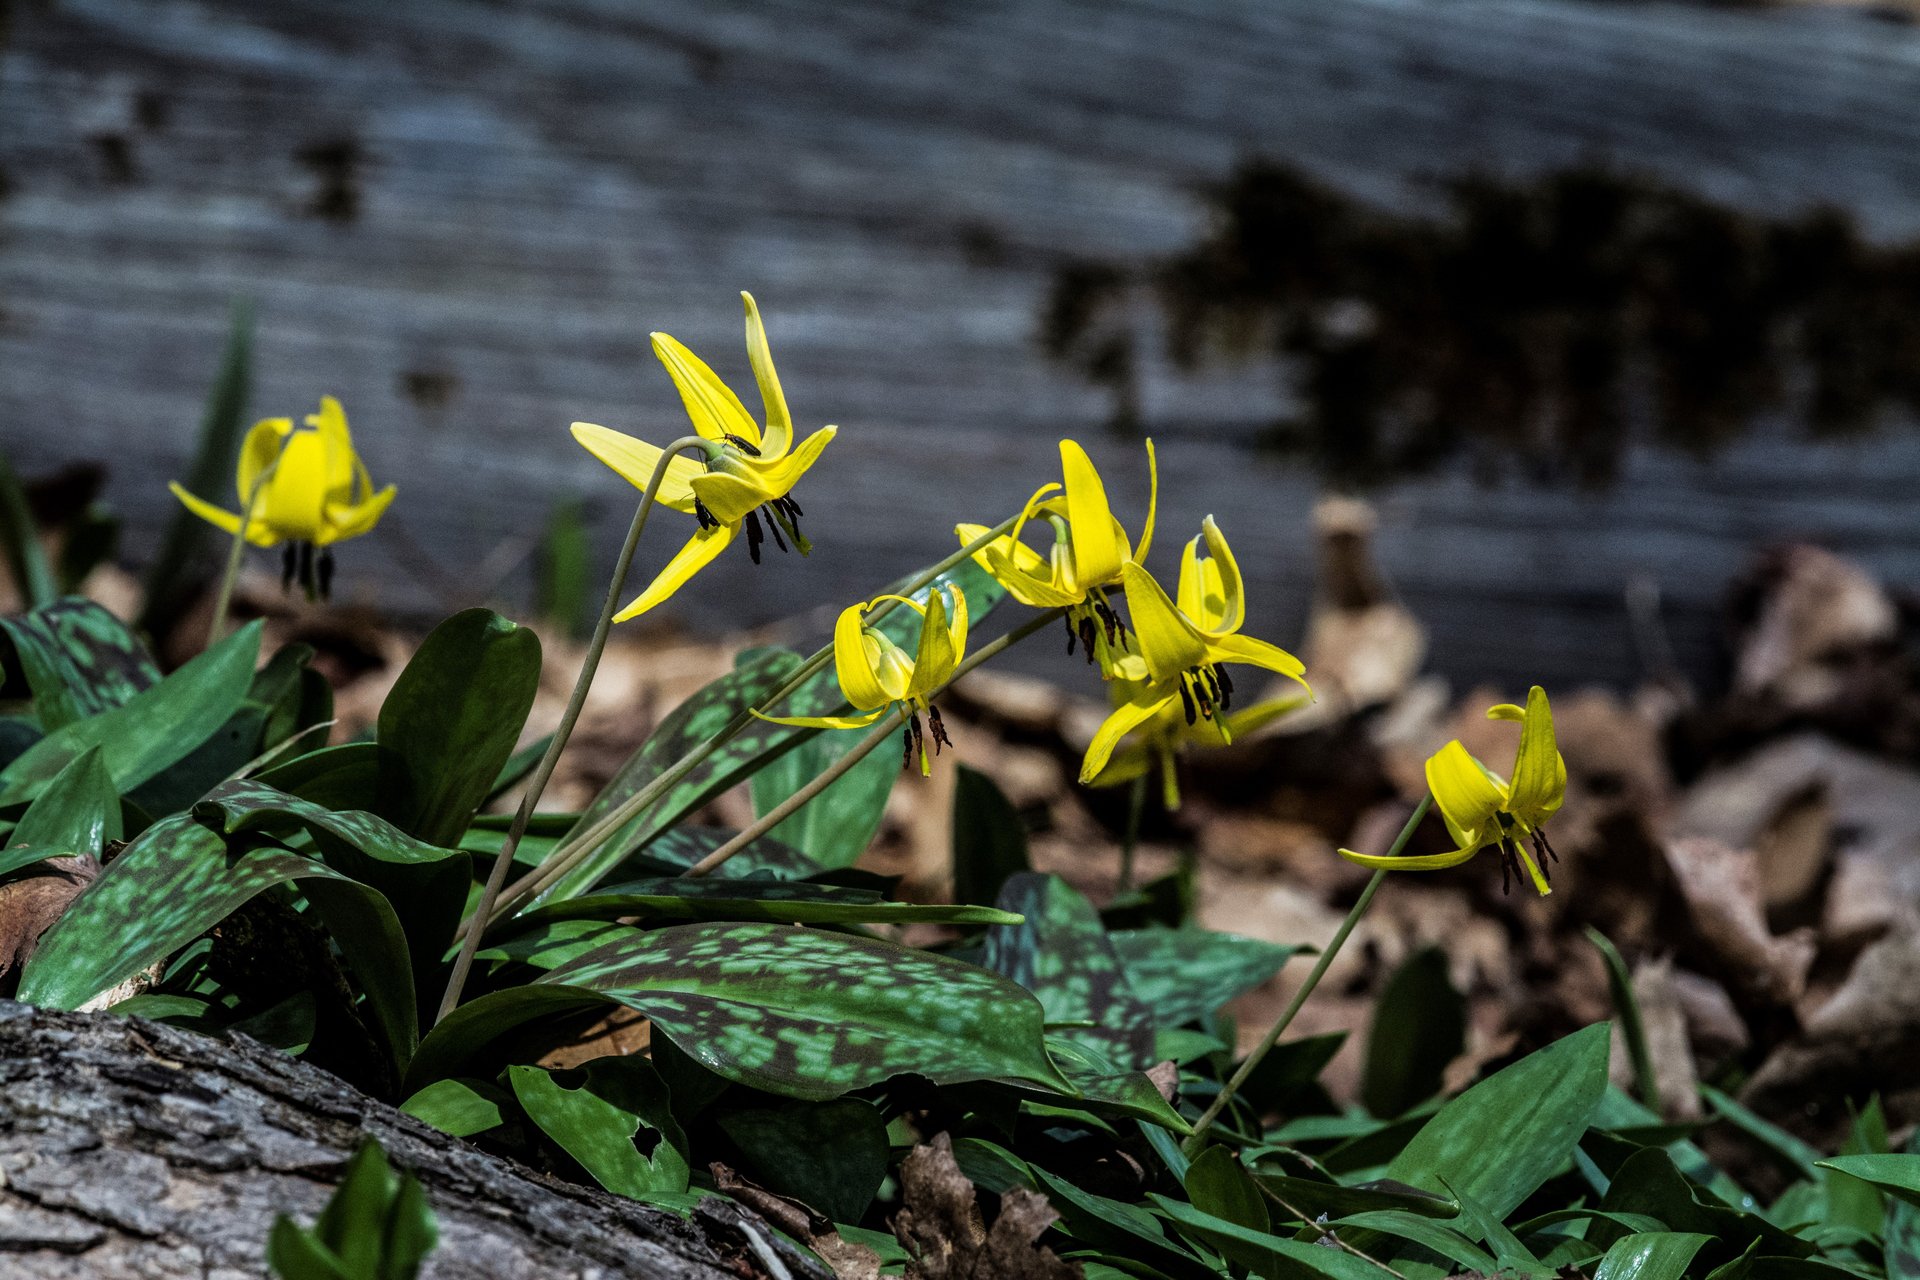 Trout Lily blooming